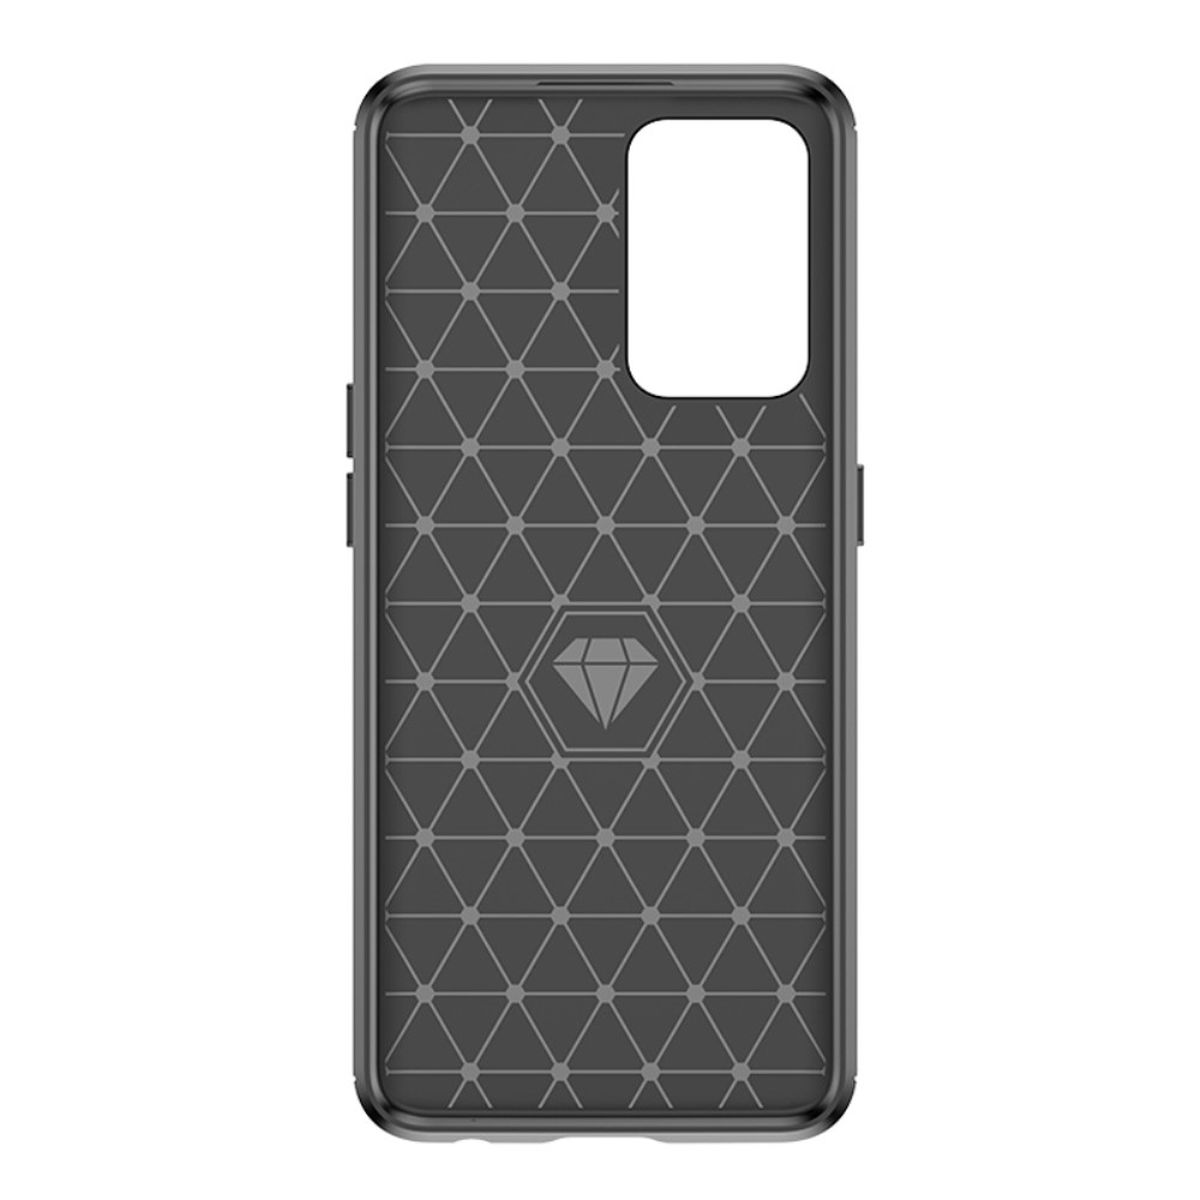 Backcover, Schwarz 5G, 2 Carbon CE Nord COVERKINGZ OnePlus, Handycase Look, im